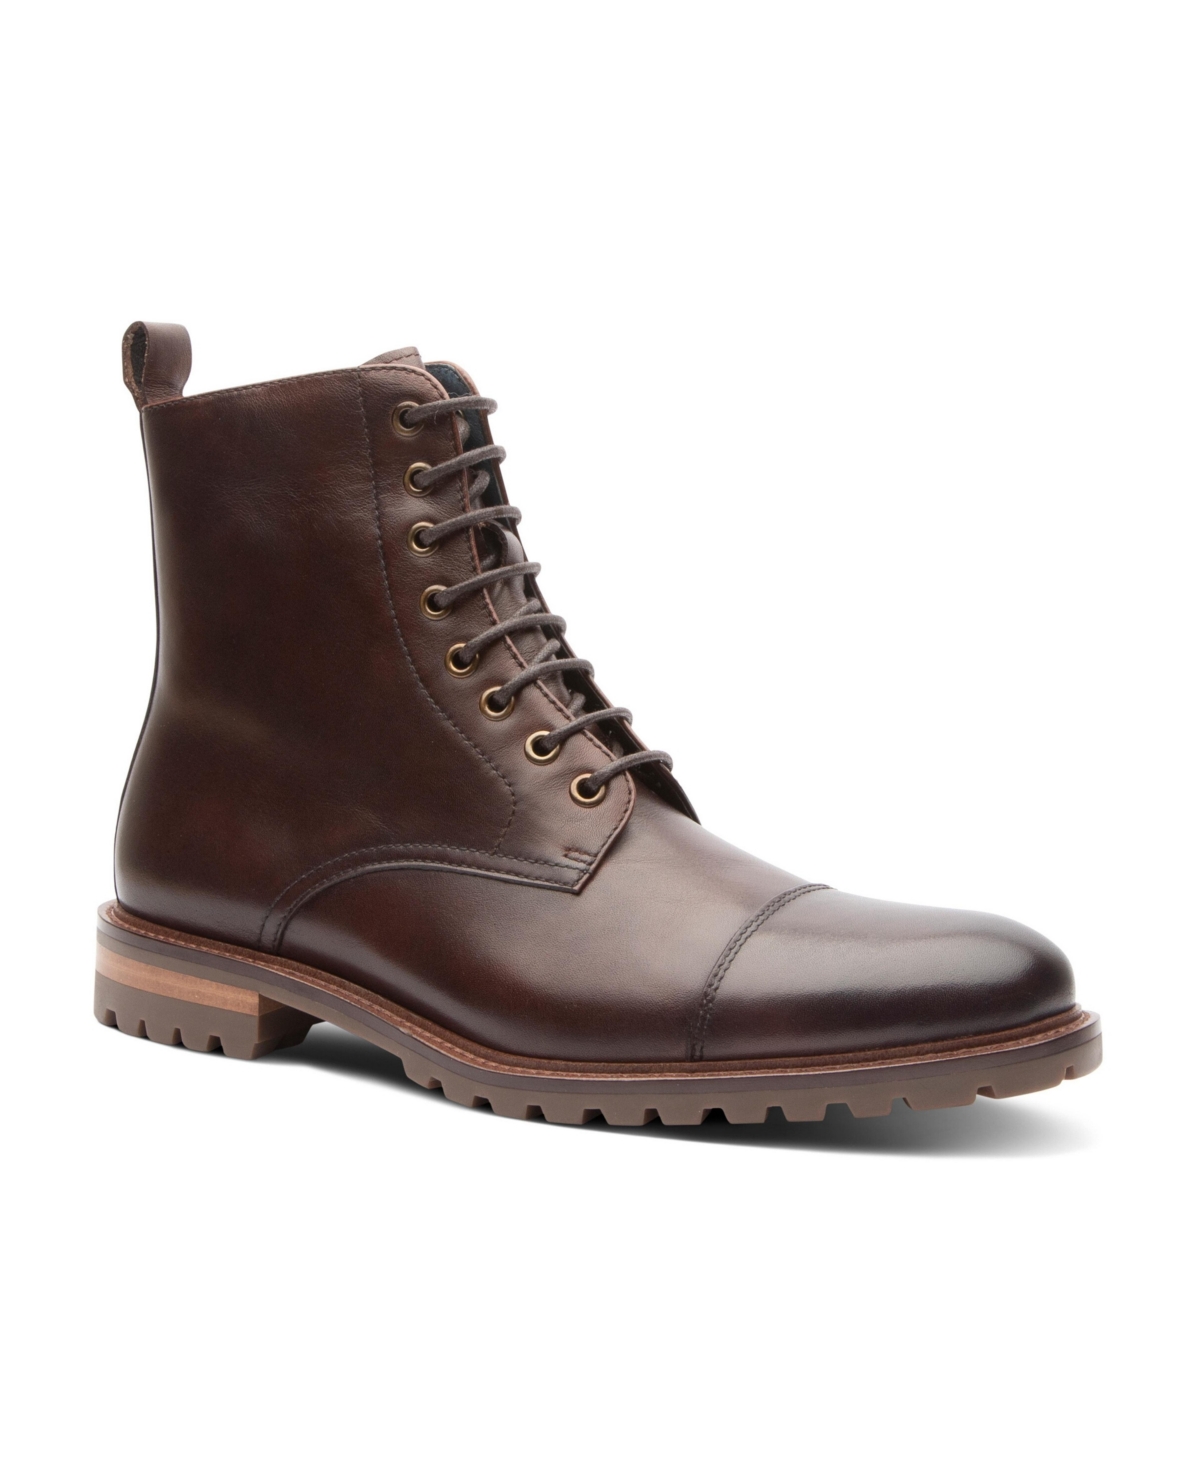 Men's Bryan Boot Casual Tall Cap Toe Lace-Up Boots - Chestnut